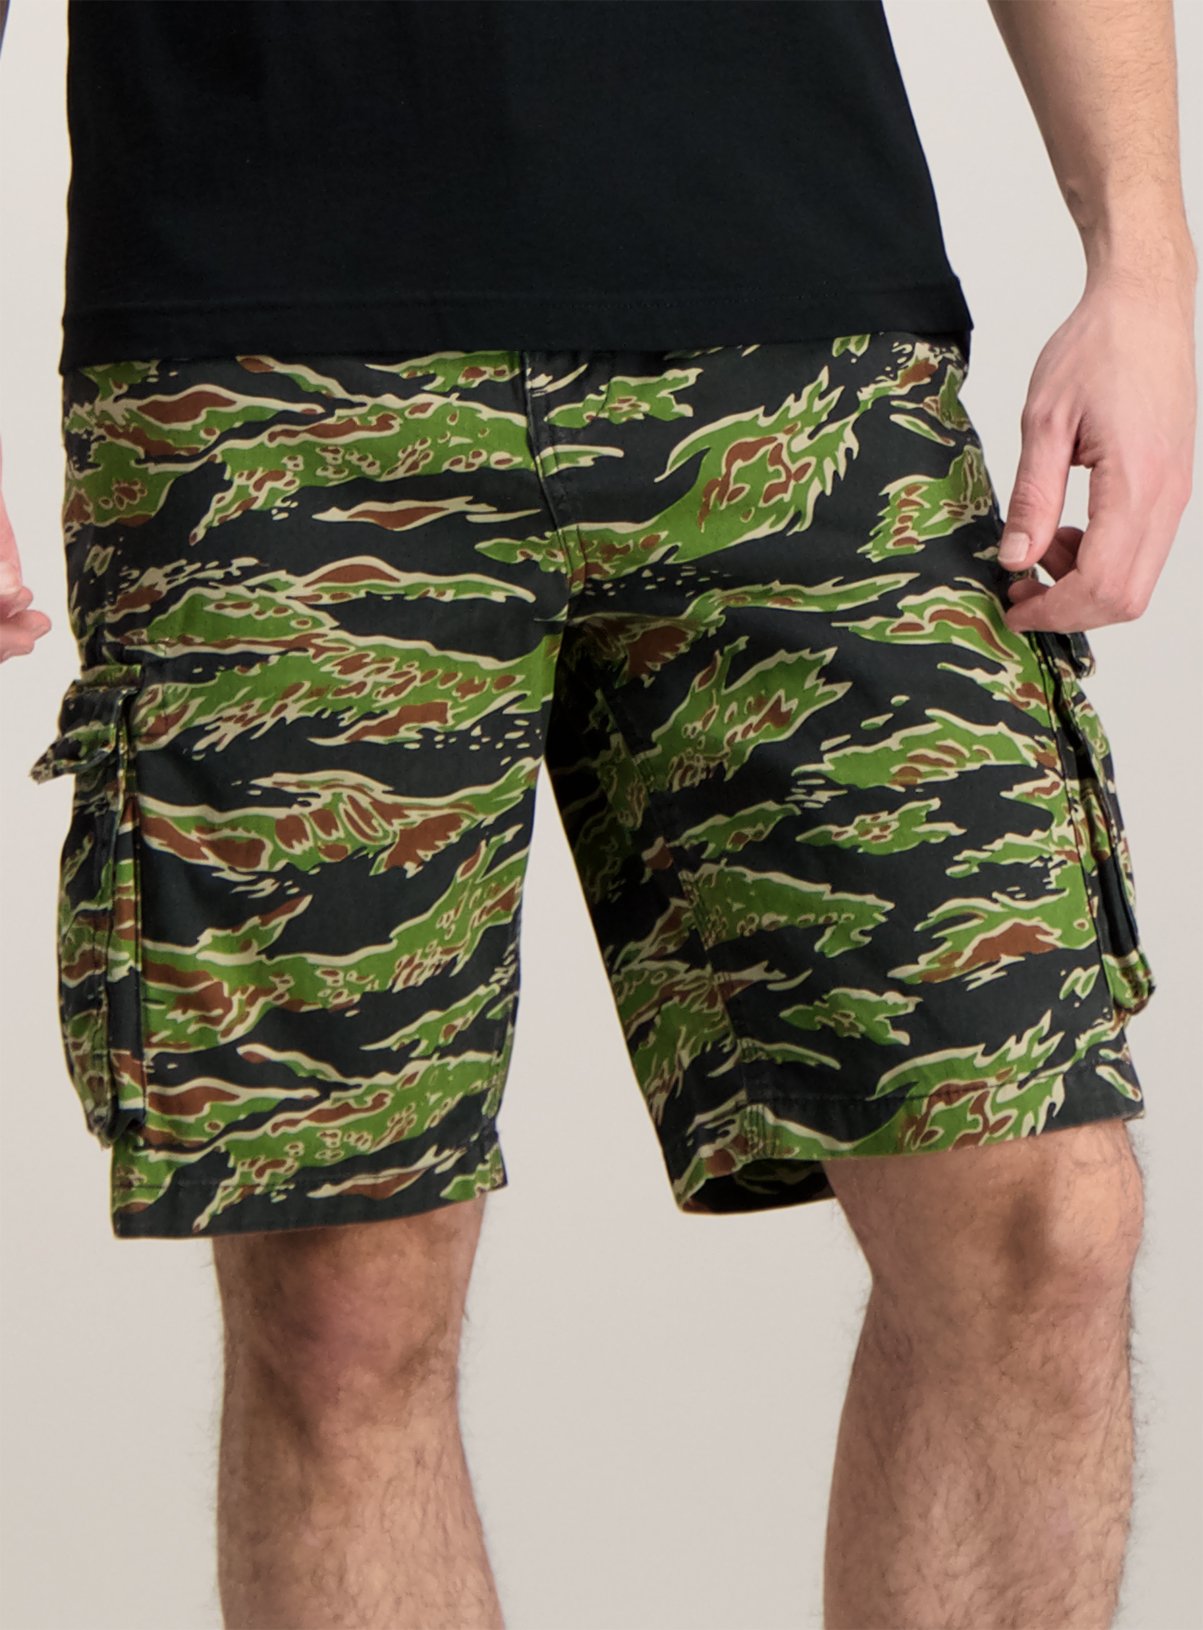 Black Camouflage Cargo Shorts Review